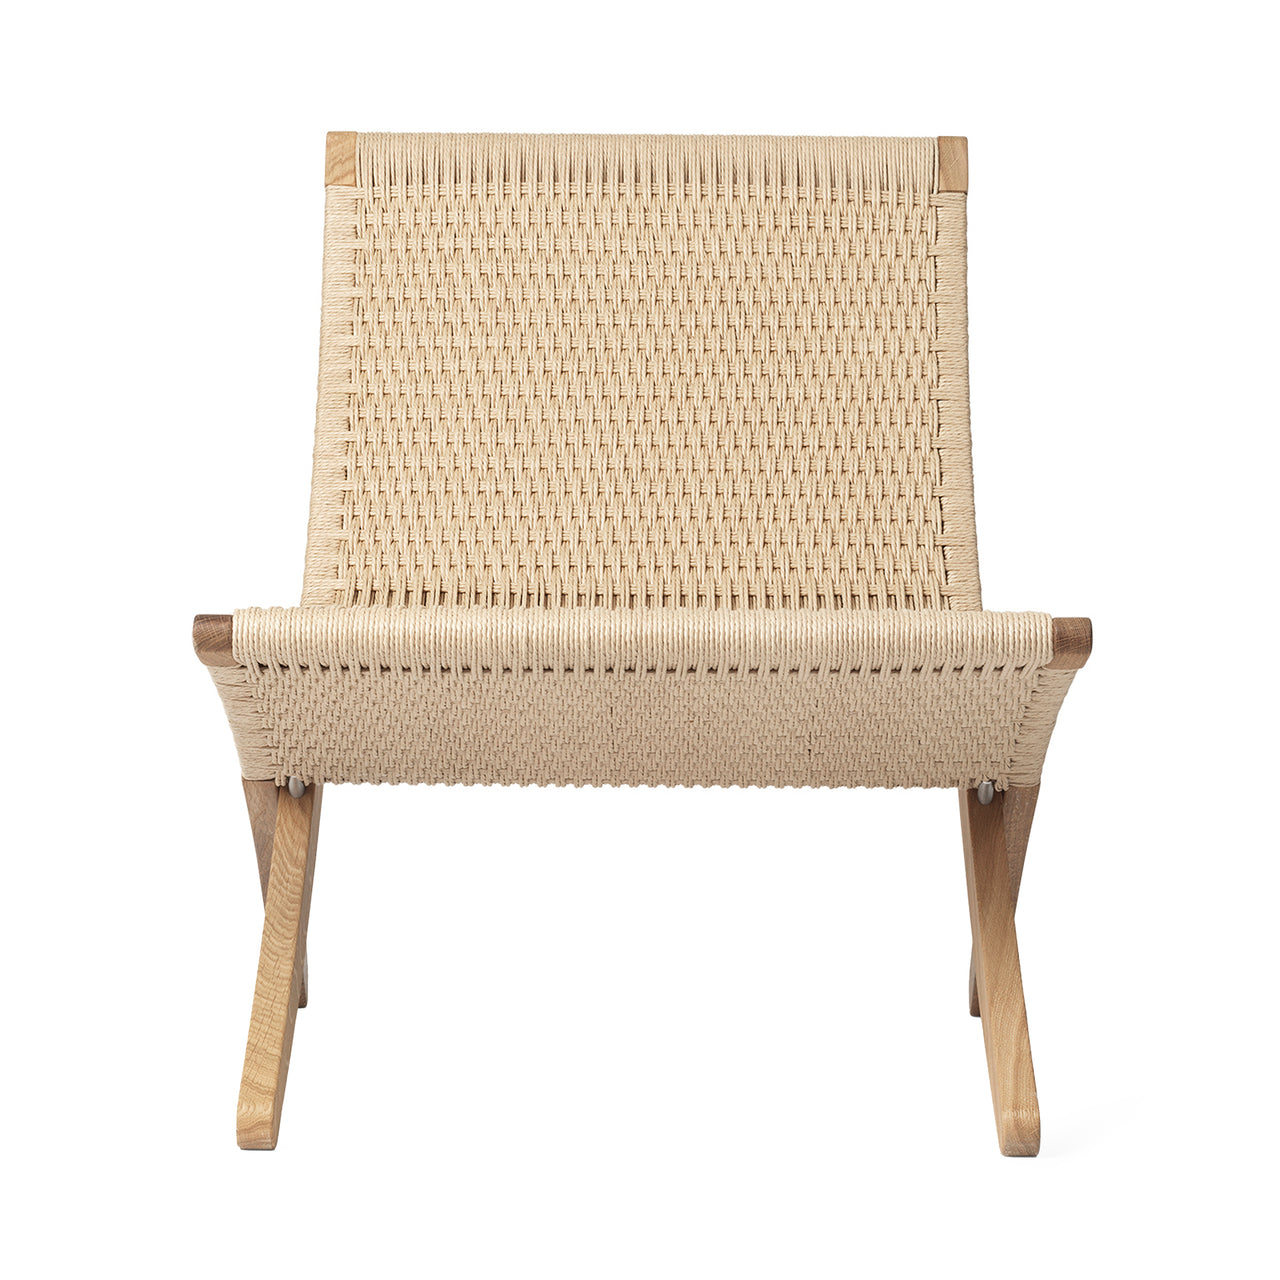 MG501 Outdoor Cuba Chair: Paper Cord + Oiled Oak